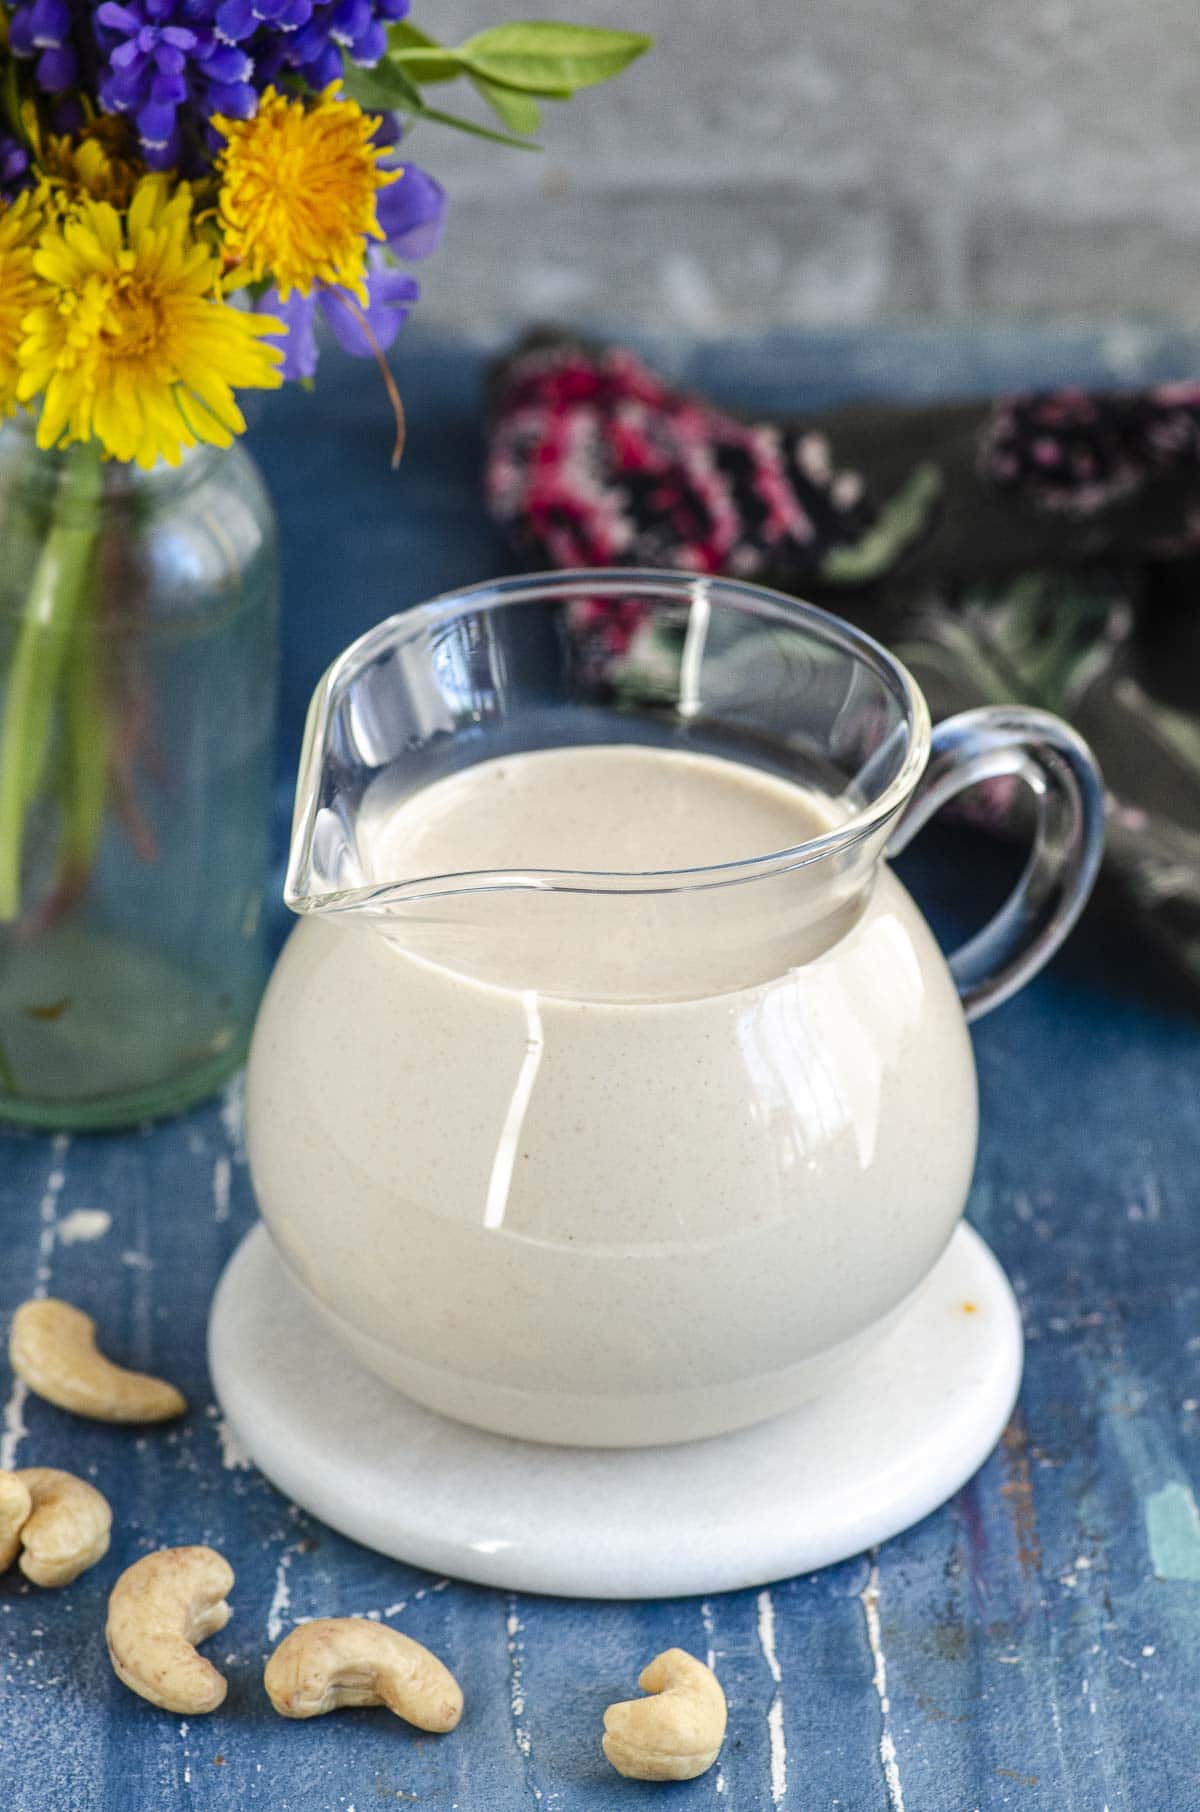 A small pitcher with cashew cream